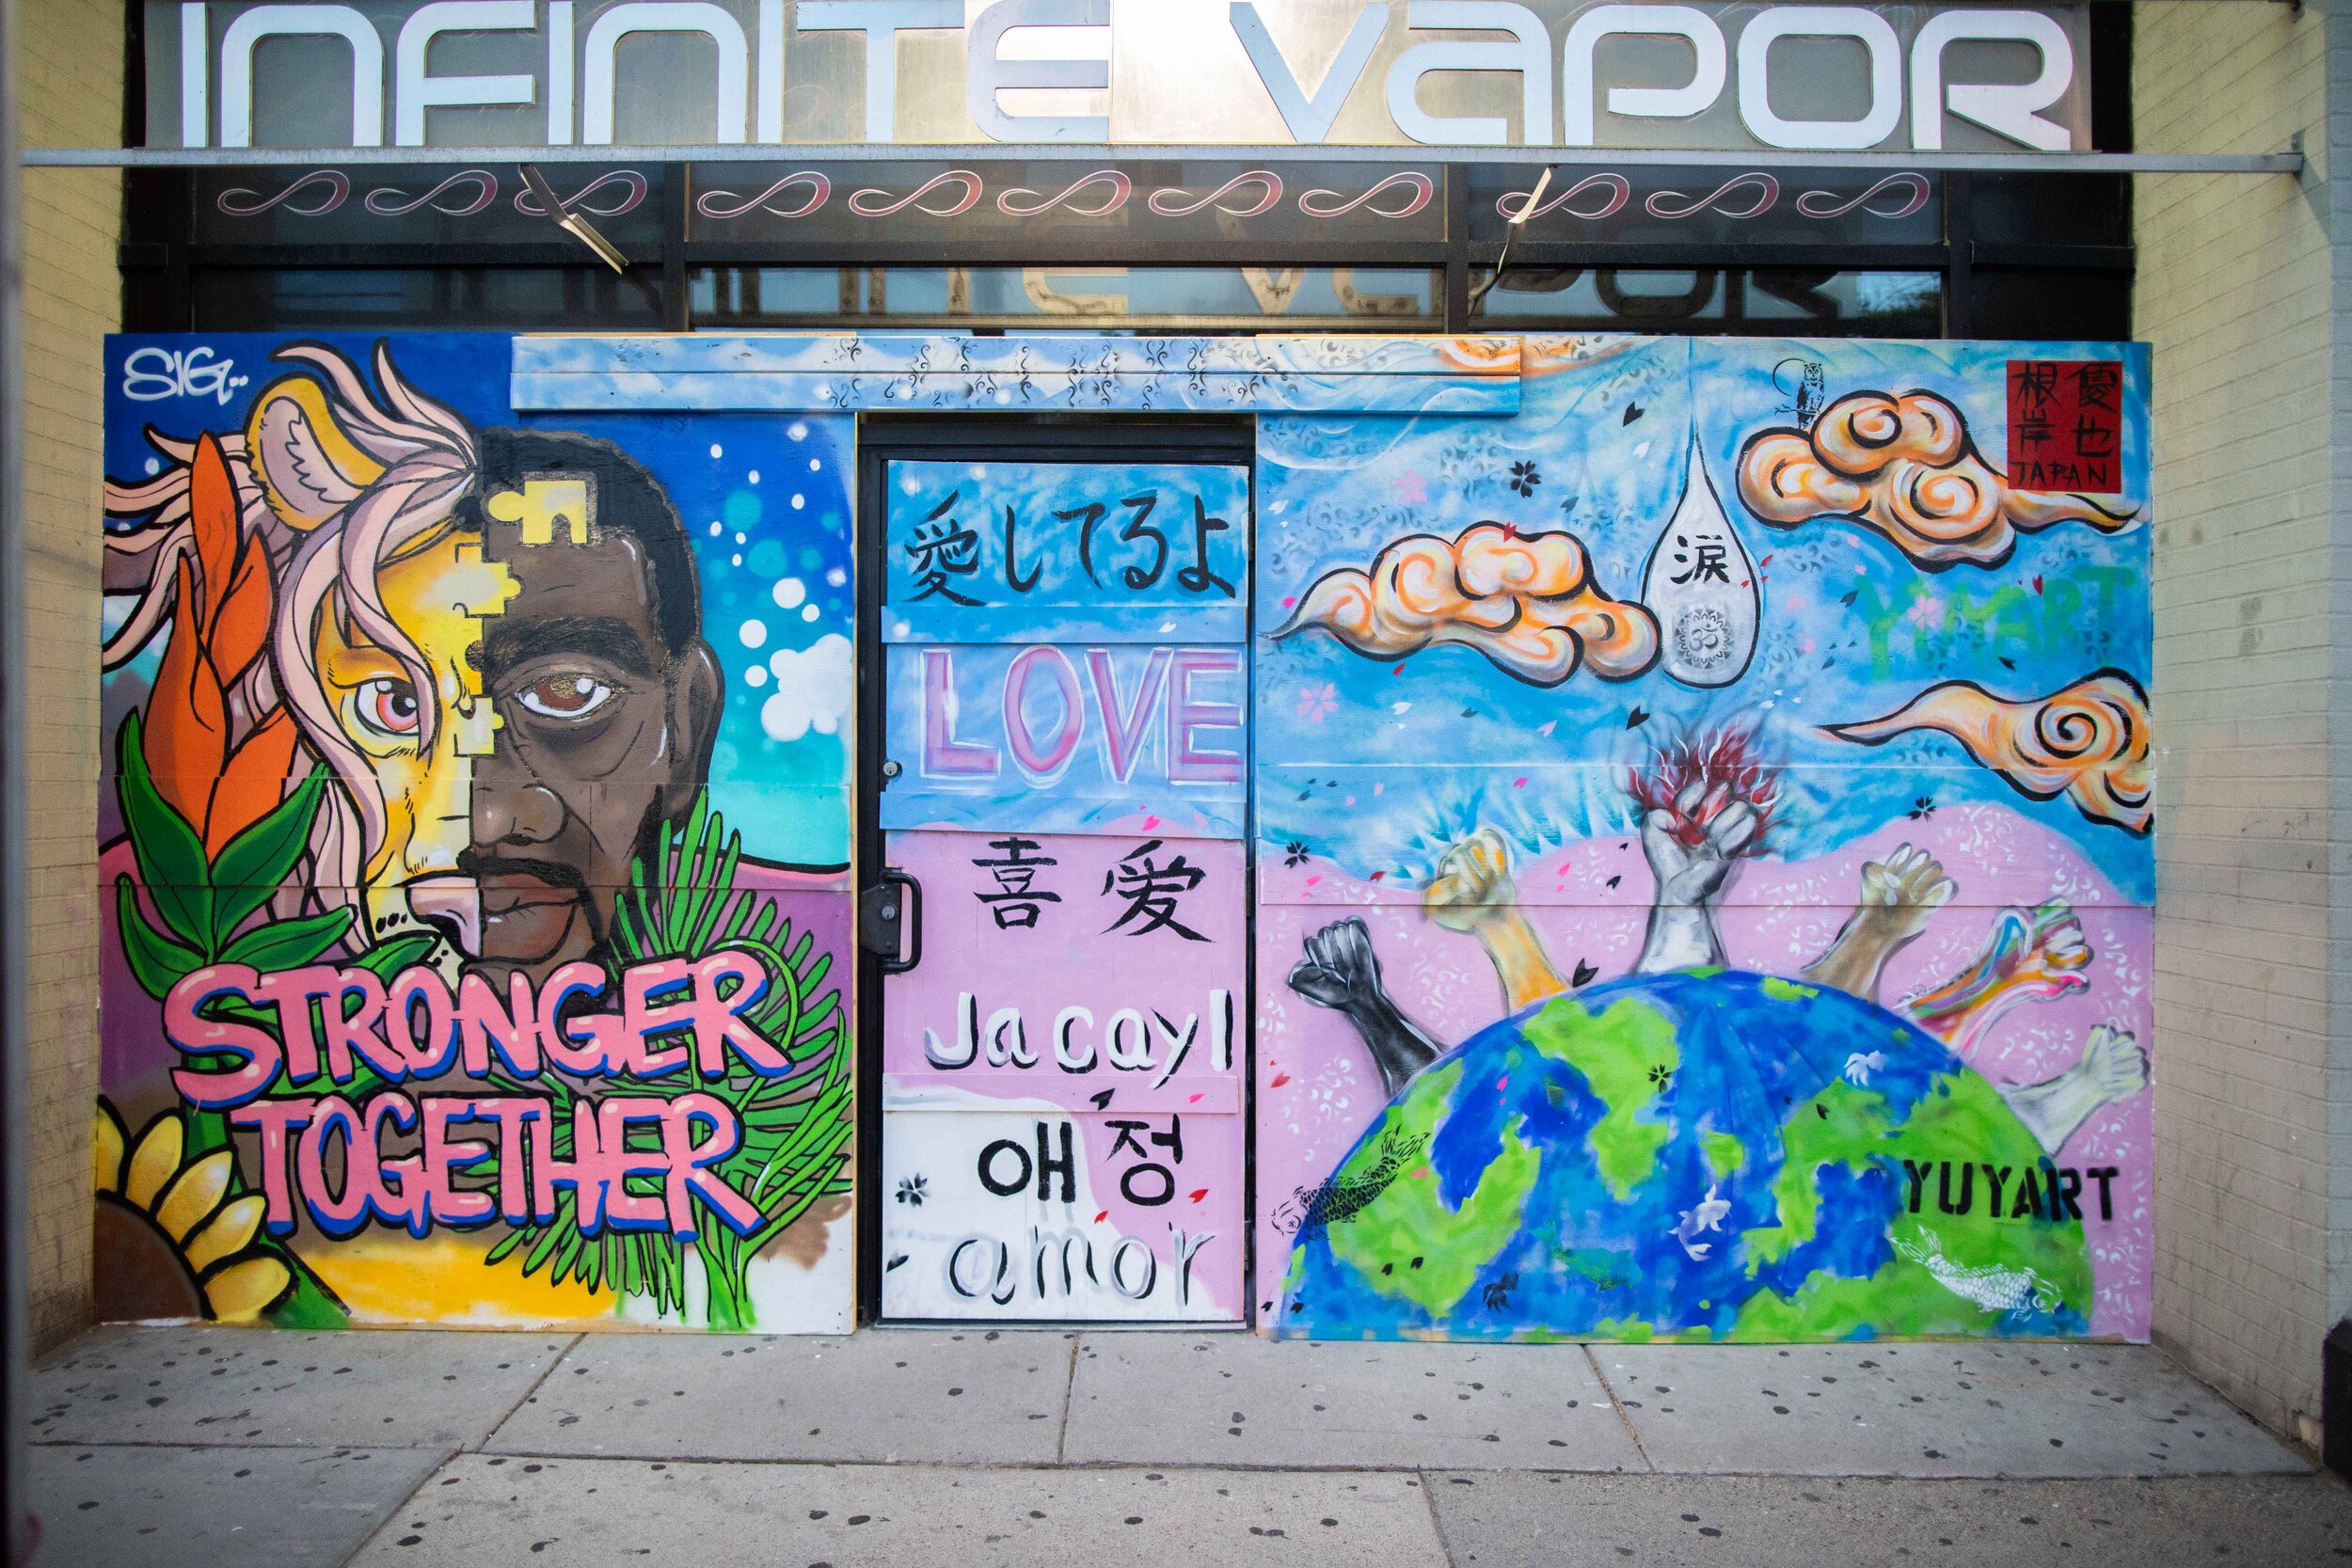  The artist Yuya Negishi painted this mural on the Infinite Vapor store. In the wake of George Floyd's death at the hands of the Minneapolis police riots and looting broke out all over the Twin Cities. Many businesses put boards up over windows in an